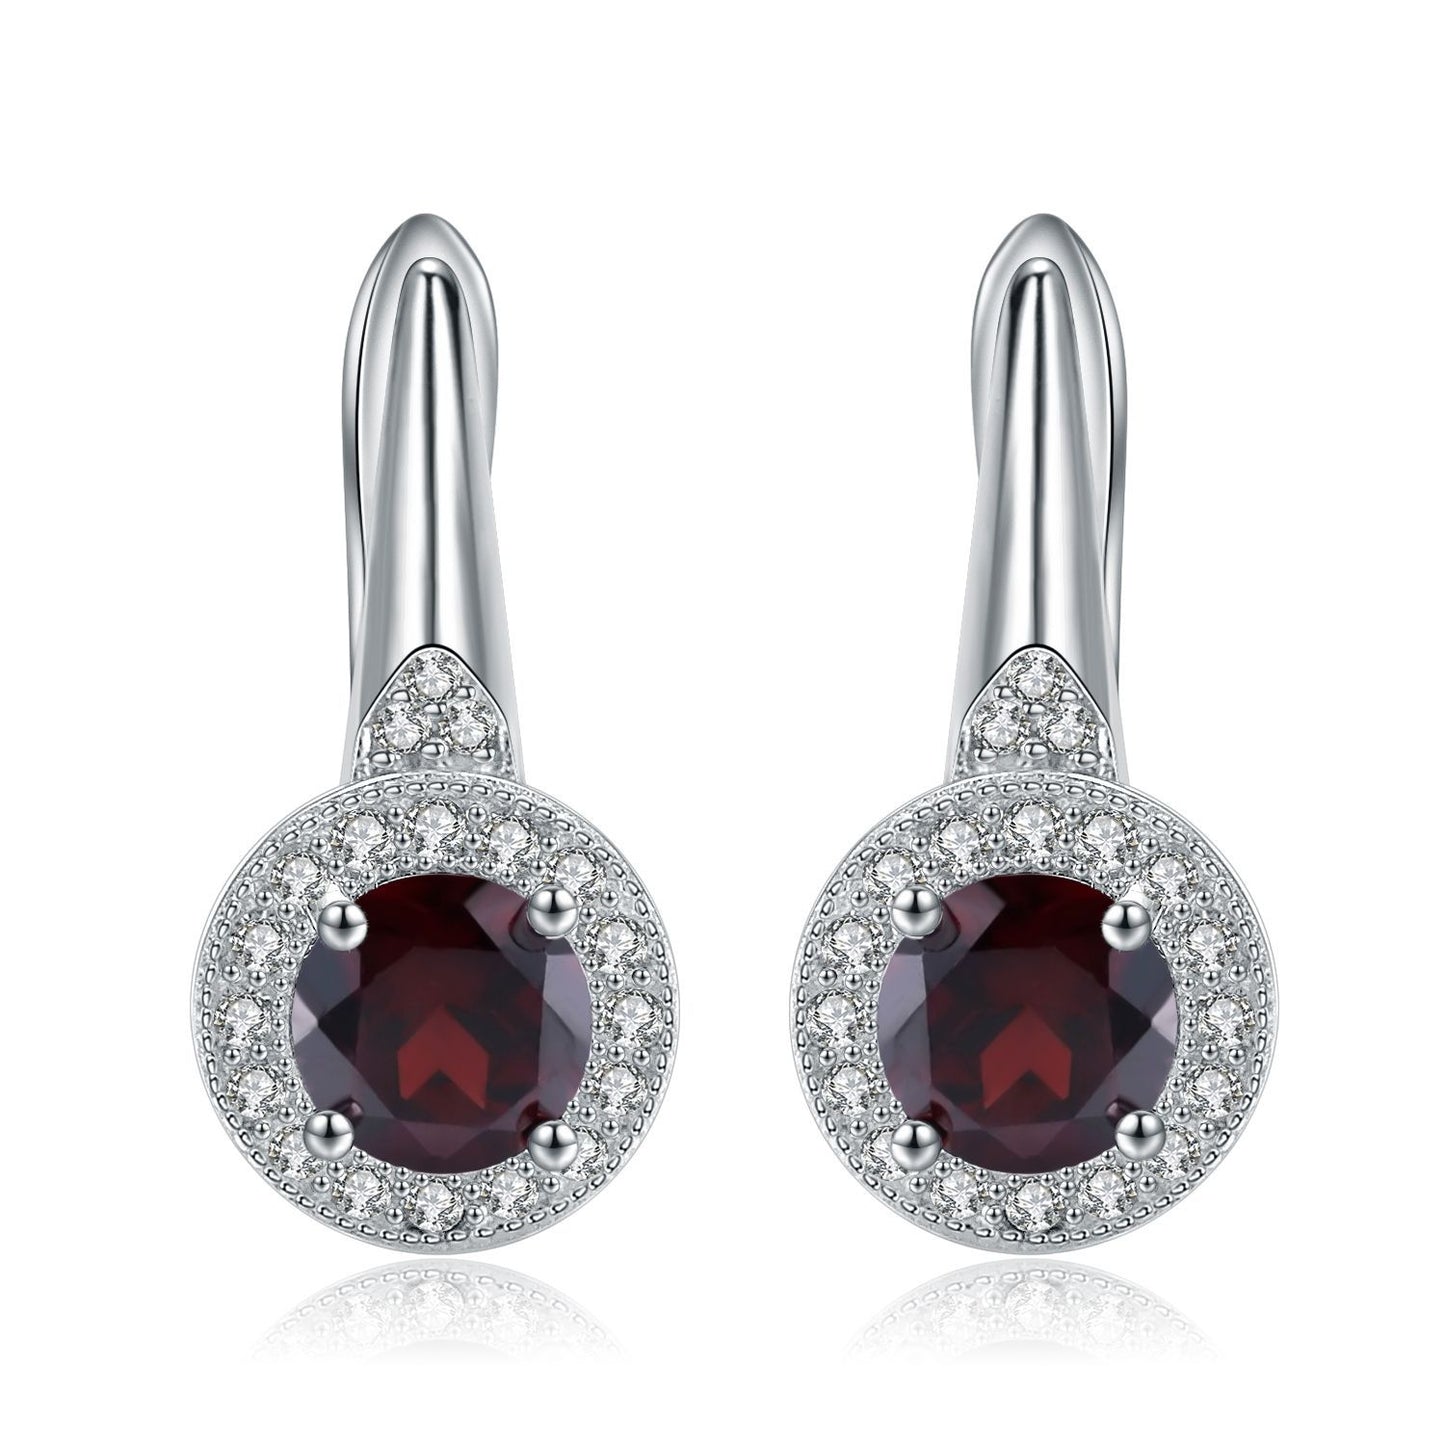 European Vintage Style Inaid Natural Garnet Soleste Halo Round Cut Silver Studs Earrings for Women